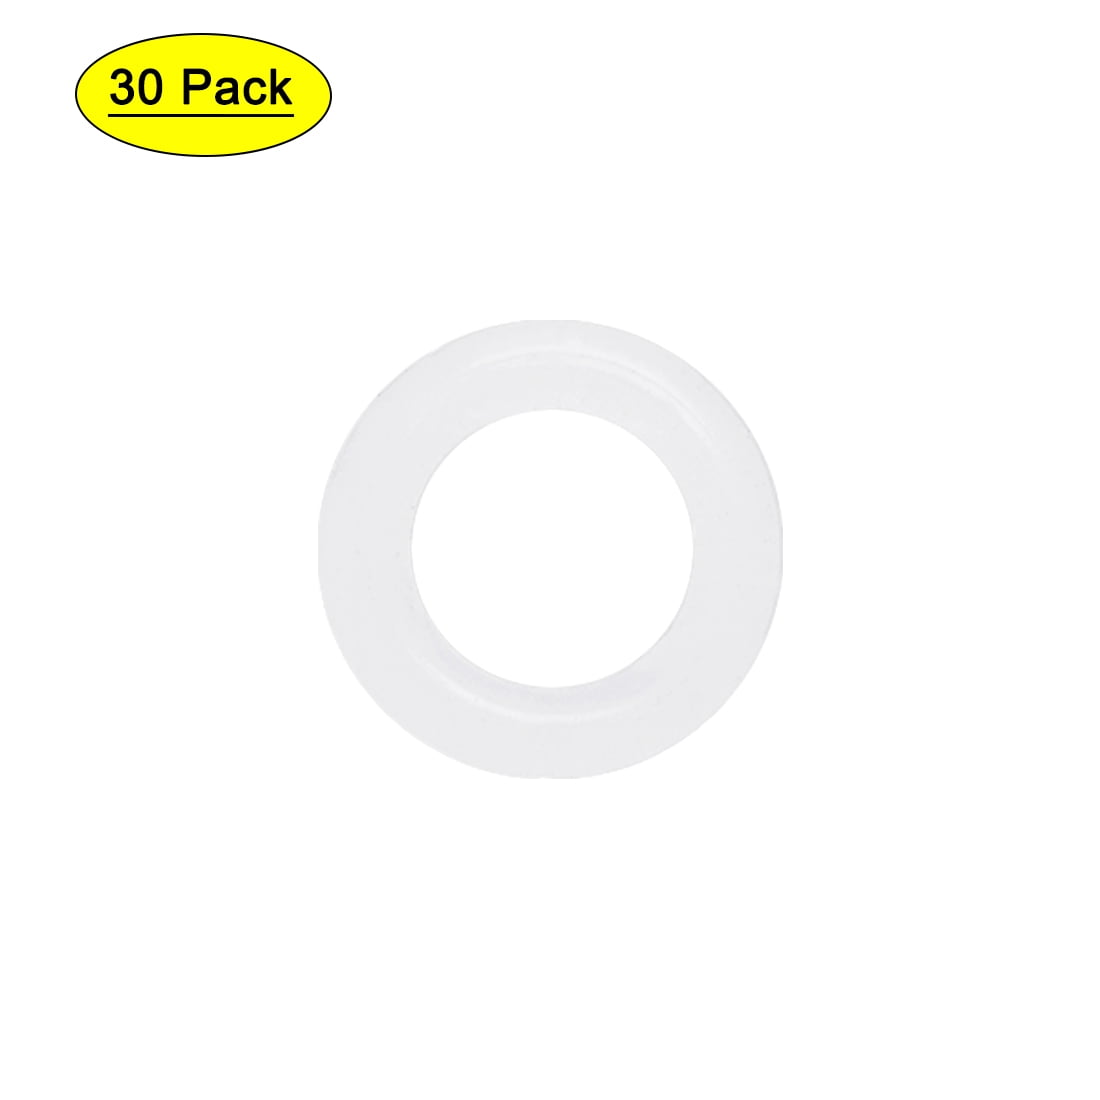 Silicone O-rings 7.5 x 1.5mm Price for 10 pcs 